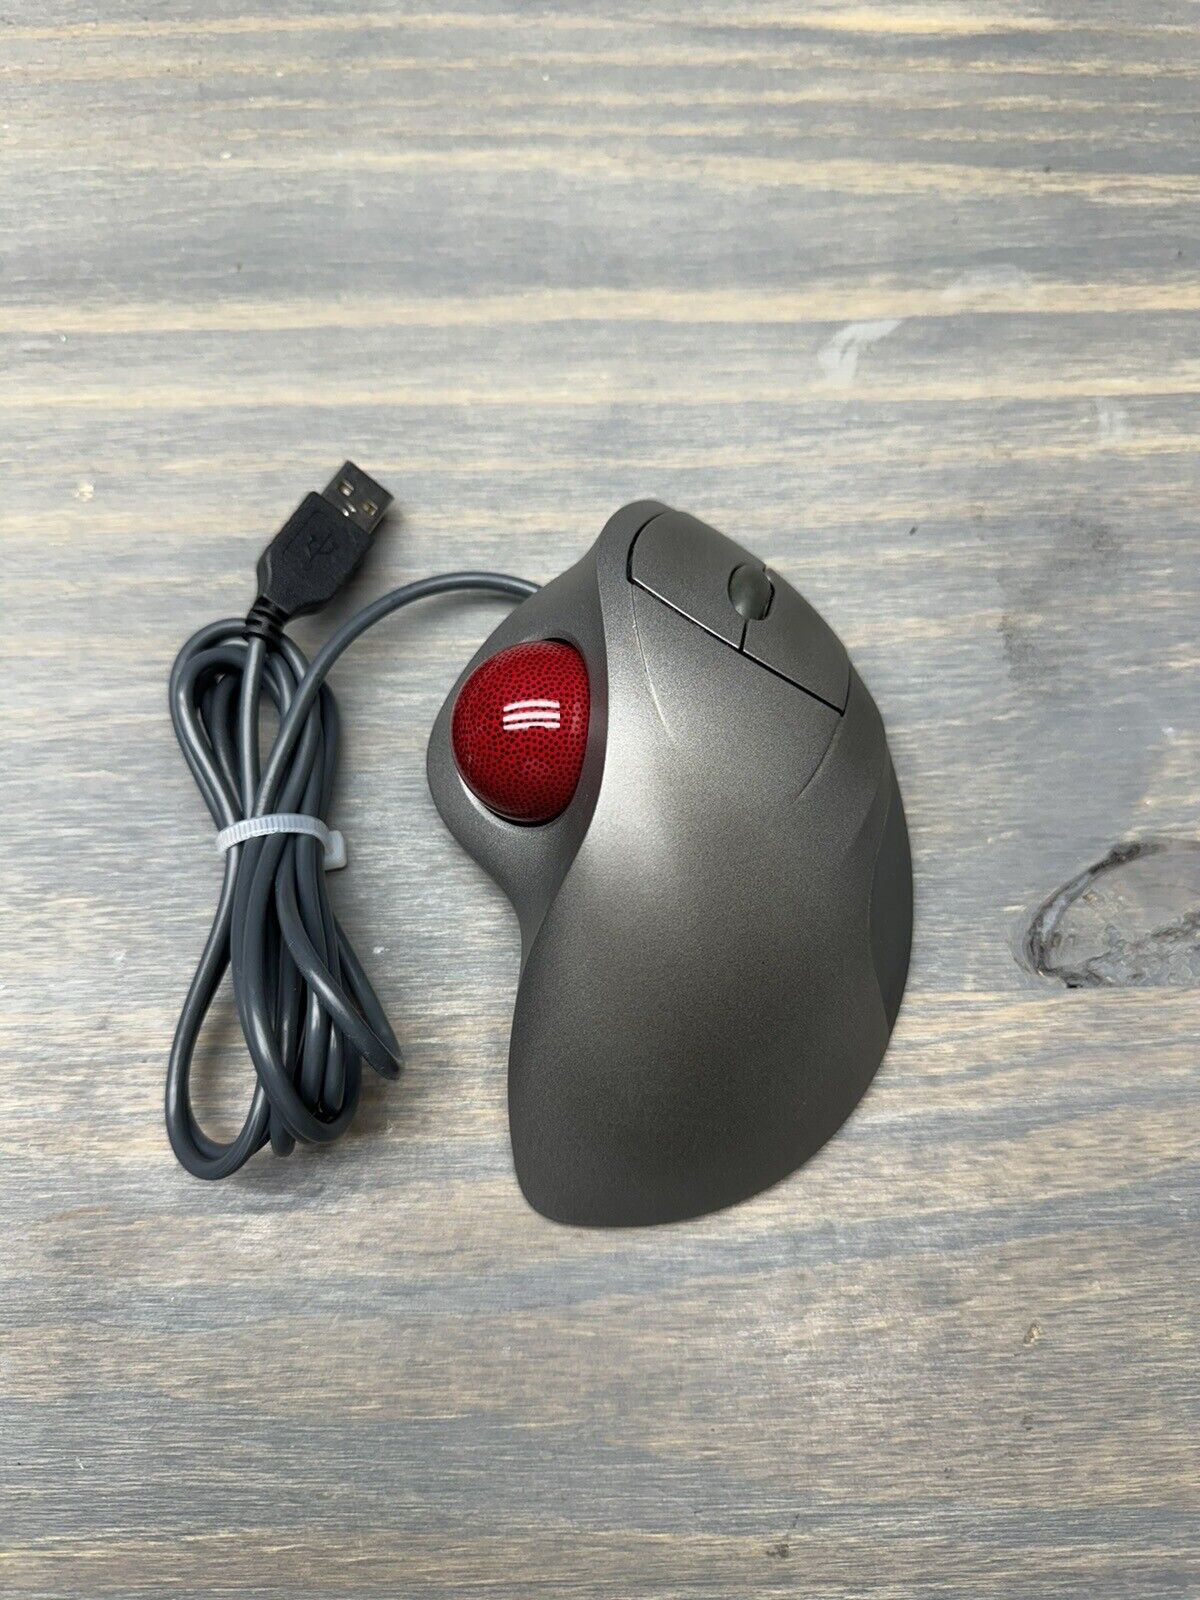 Logitech Trackman Wheel Mouse Optical T-BB18 Tested Works 804360-1000 